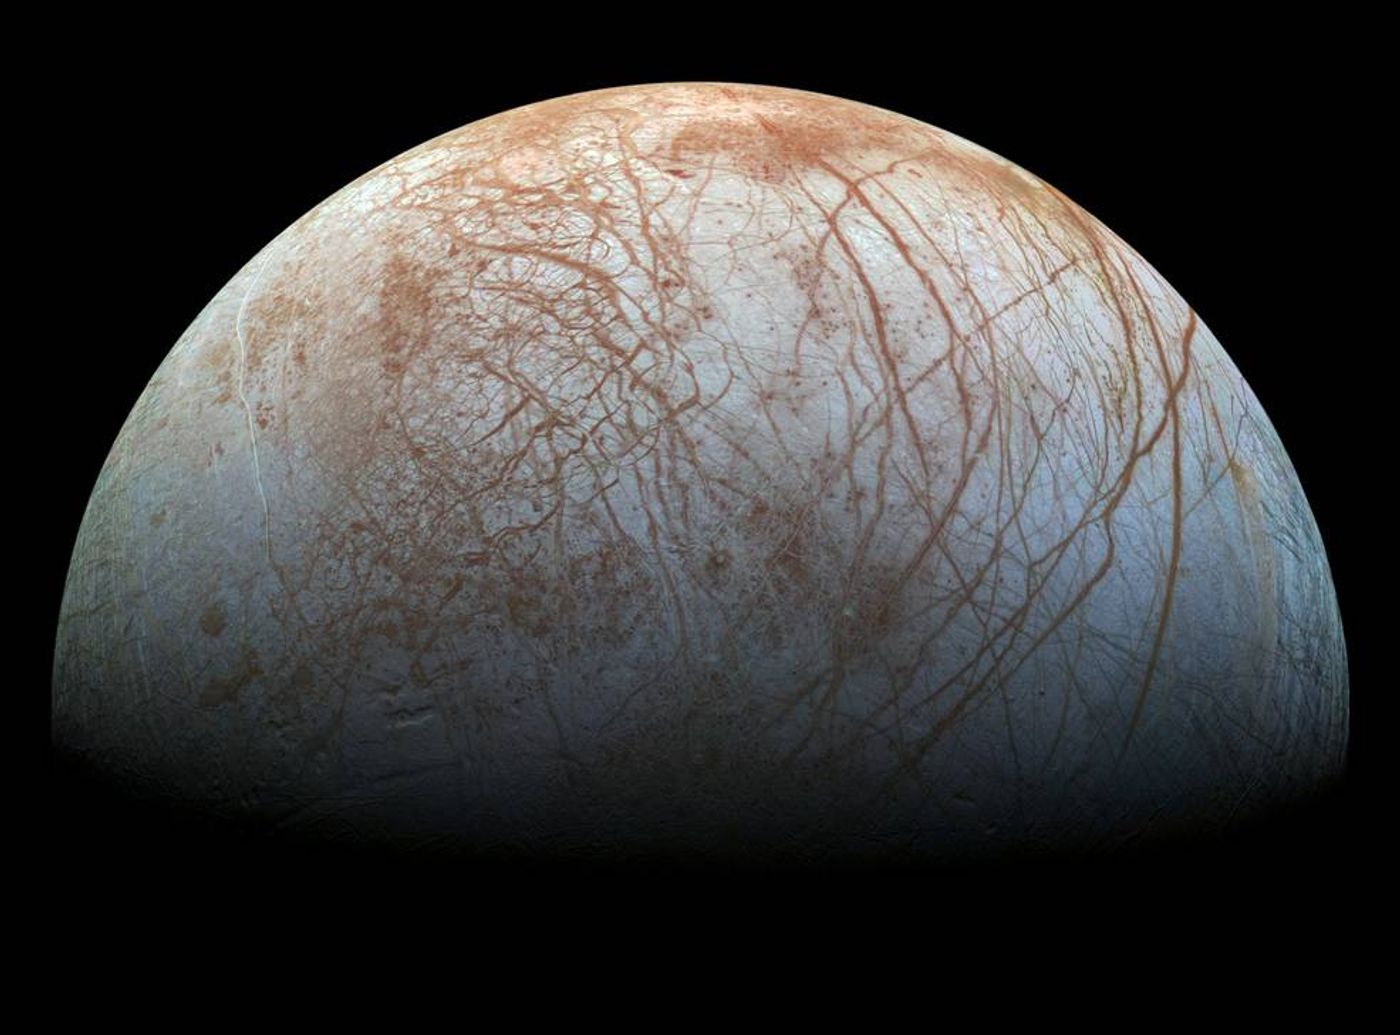 Europa might have a sub-surface ocean that supports life forms, and NASA wants to find out for sure.